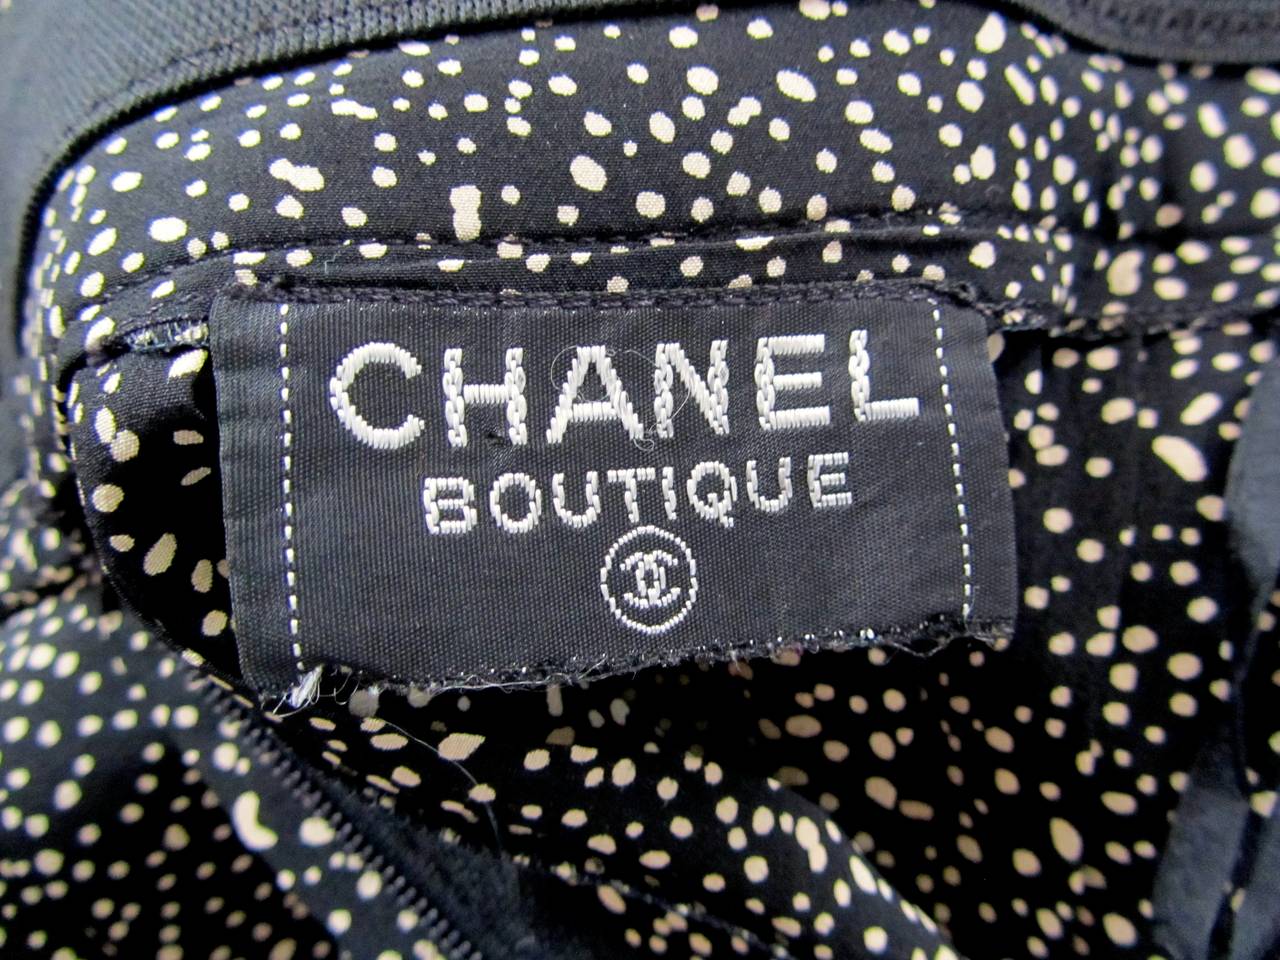 Chanel Silk Suit - Black and Cream Fabric with Iconic Lion Buttons - 1970's For Sale 2